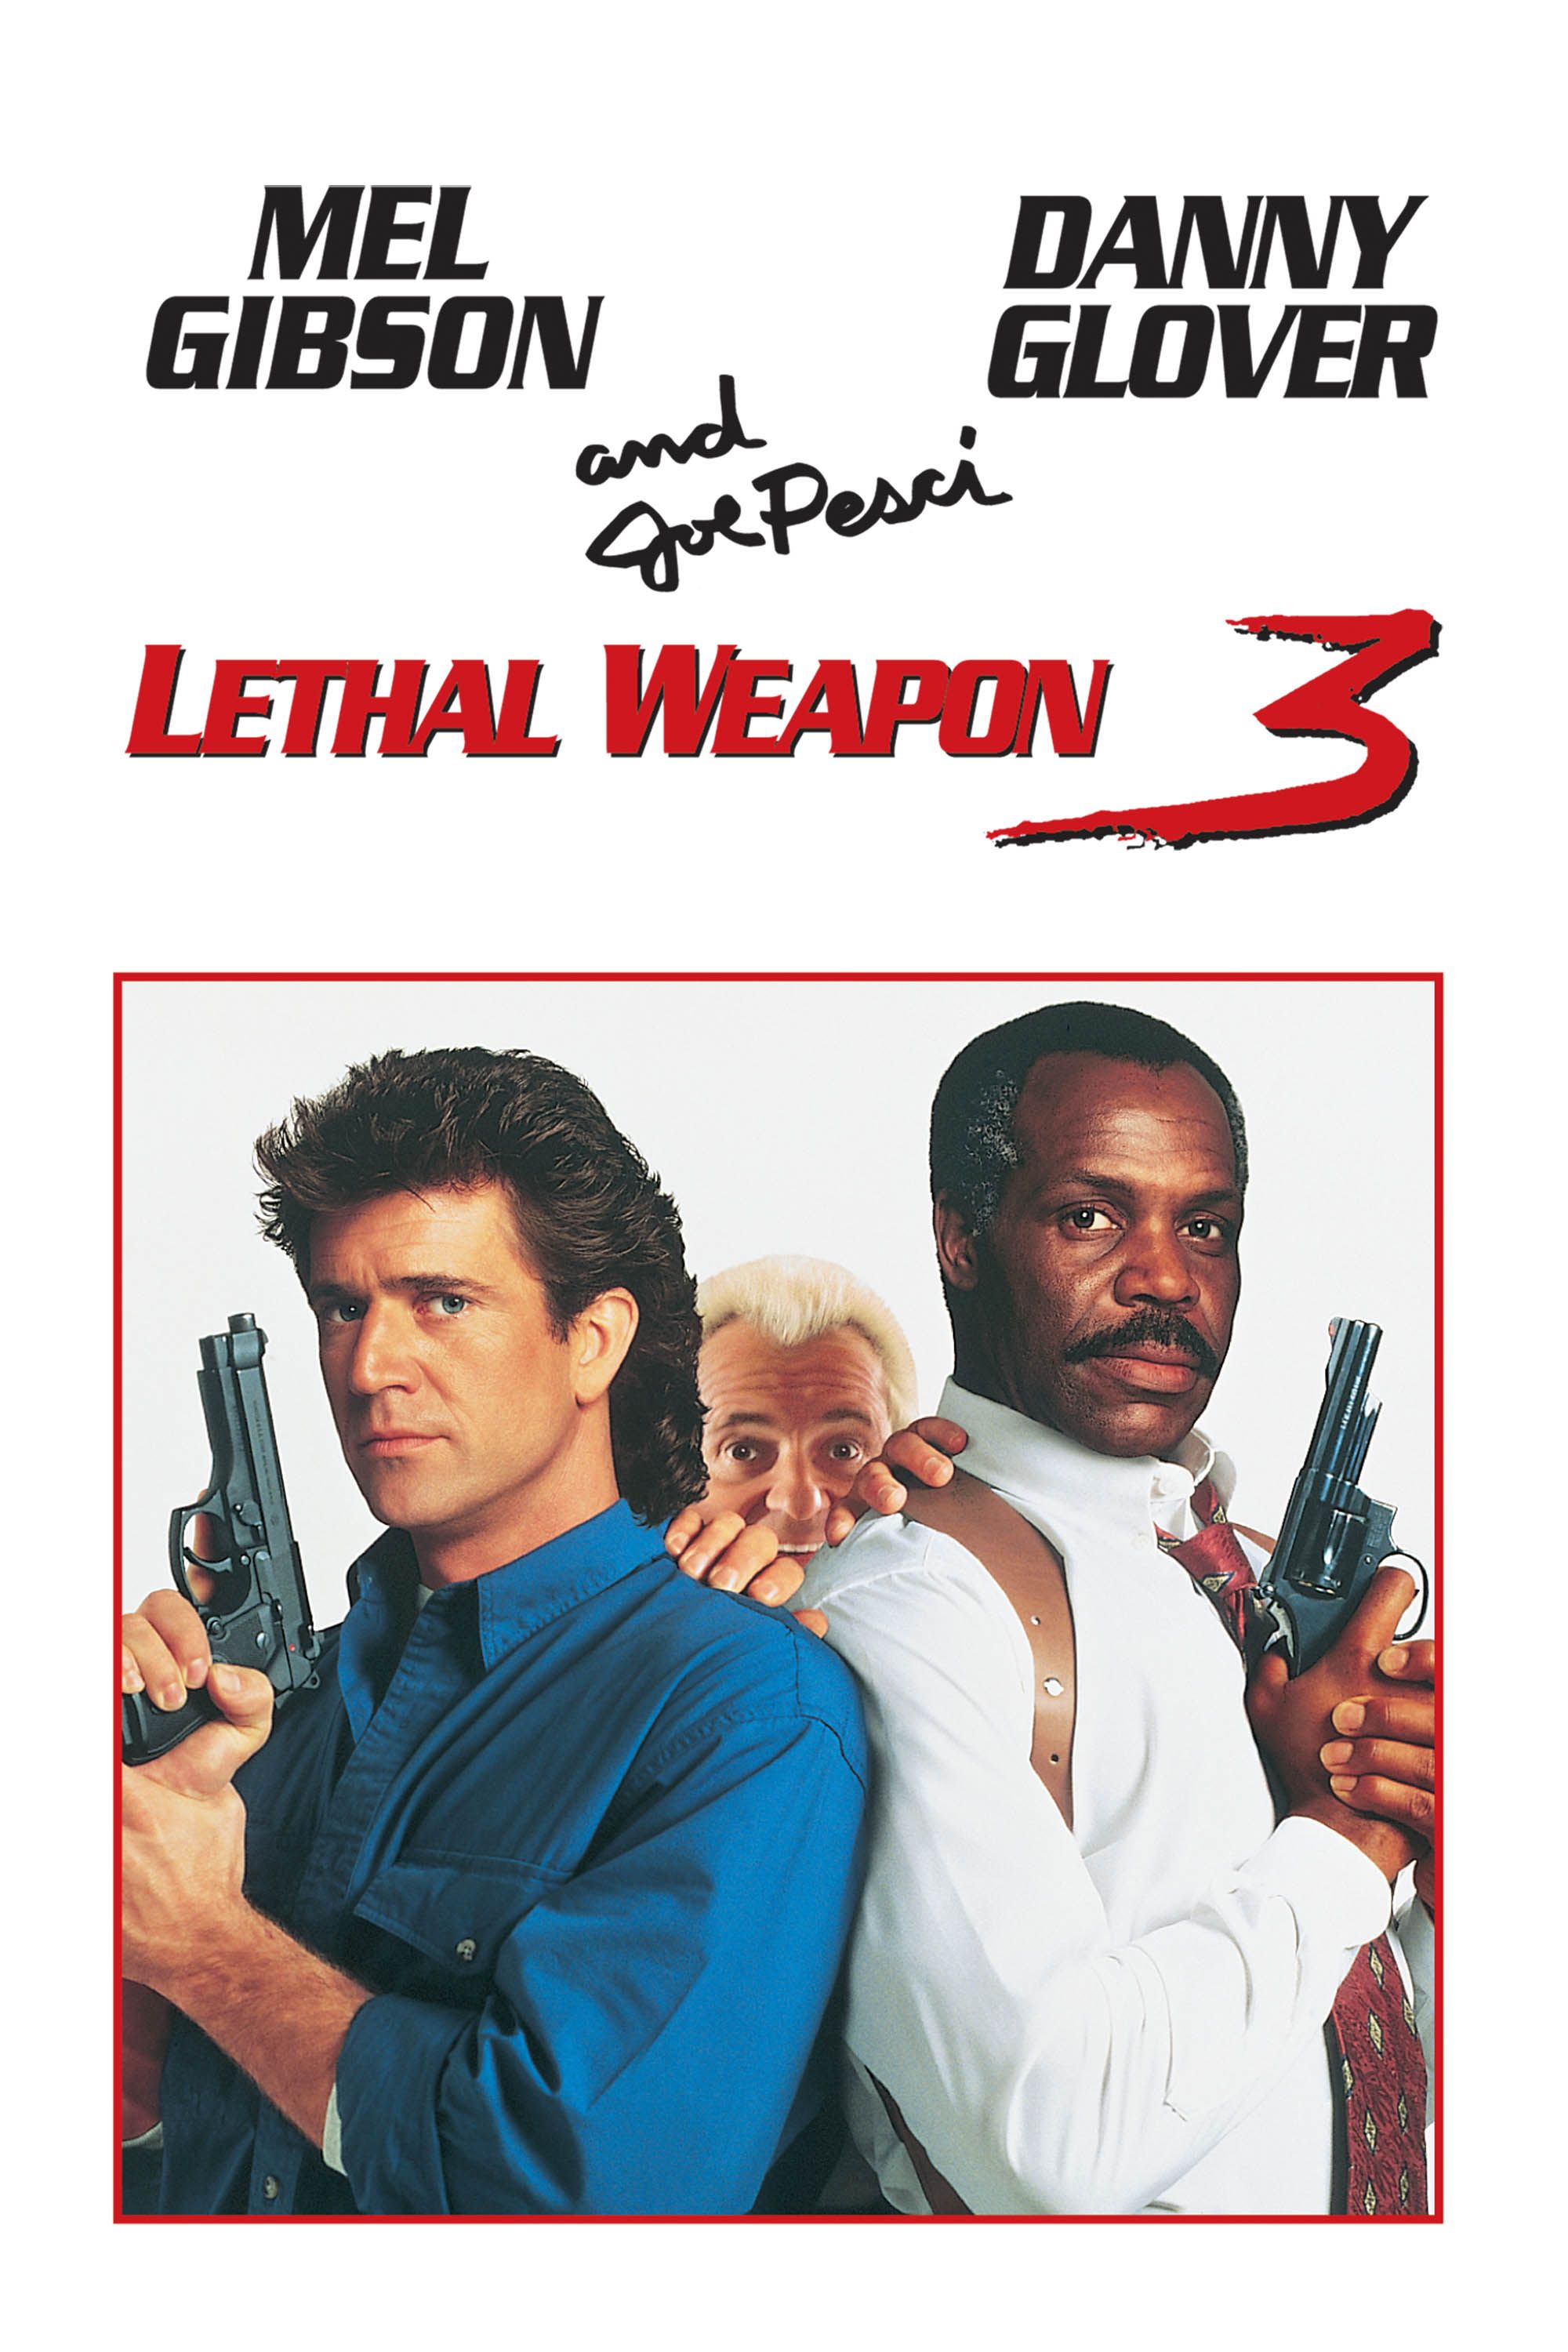 lethal weapon 3 lorna